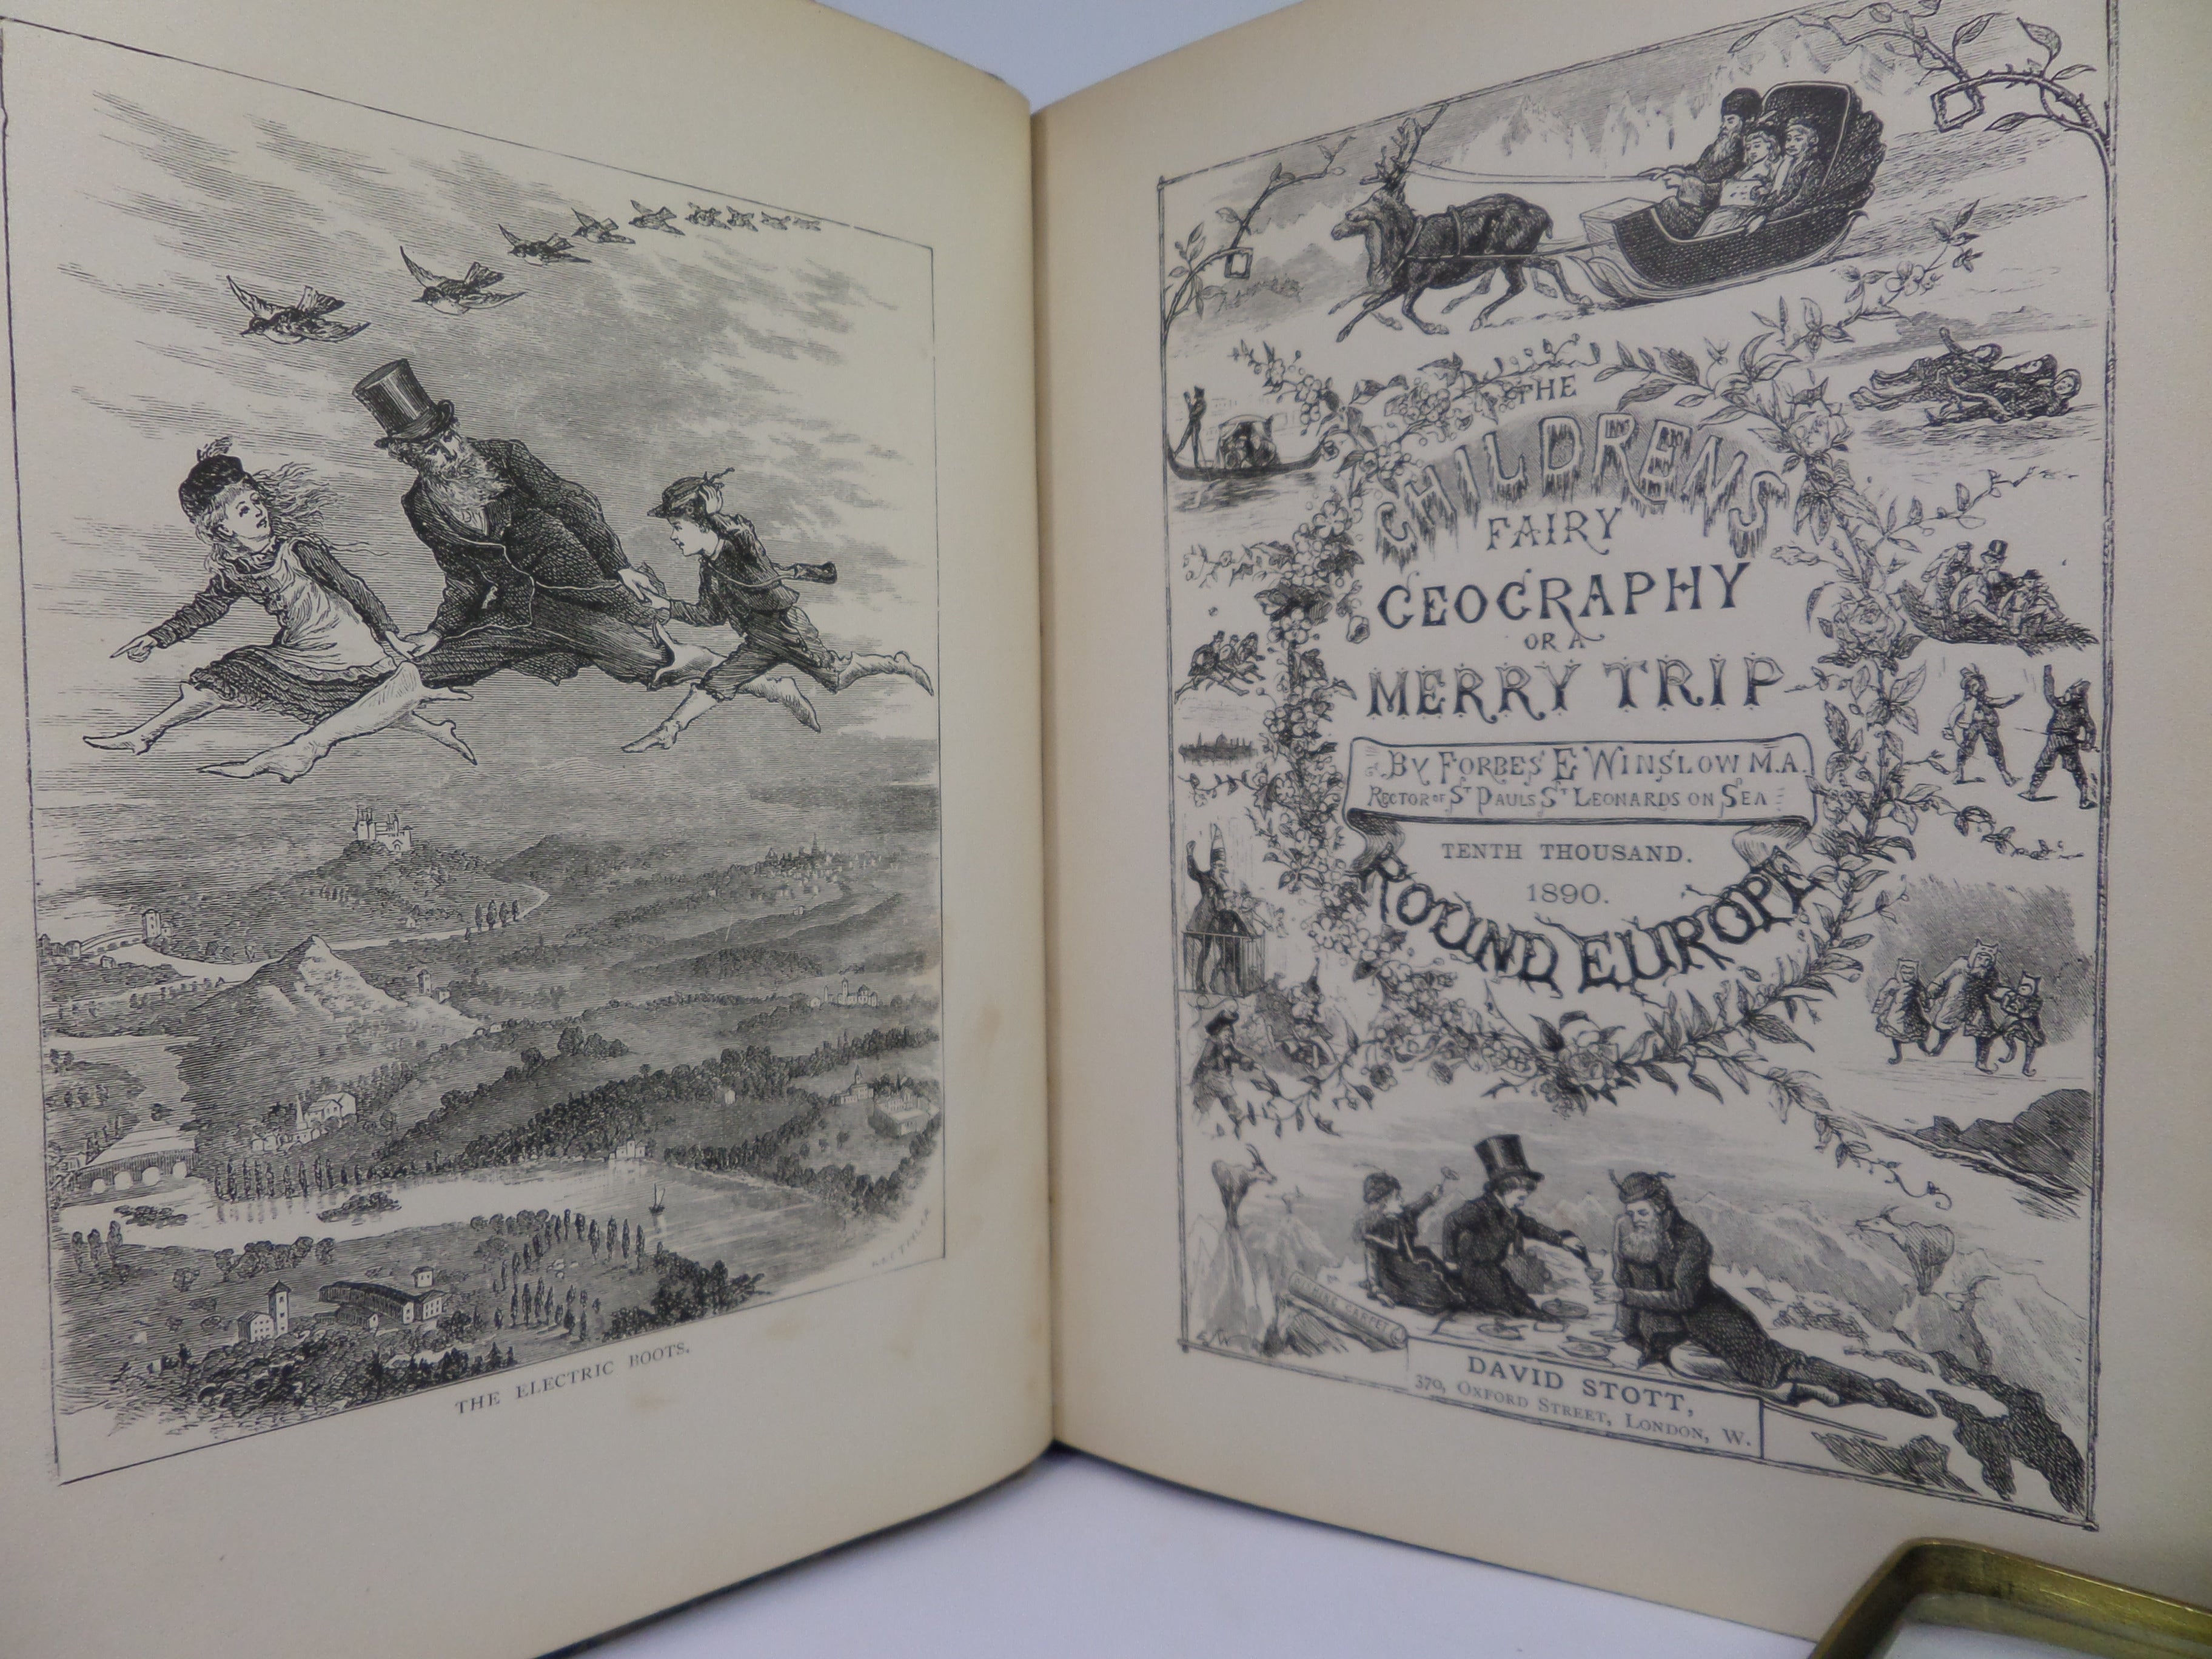 THE CHILDREN'S FAIRY GEOGRAPHY OR A MERRY TRIP ROUND EUROPE BY FORBES E. WINSLOW 1890